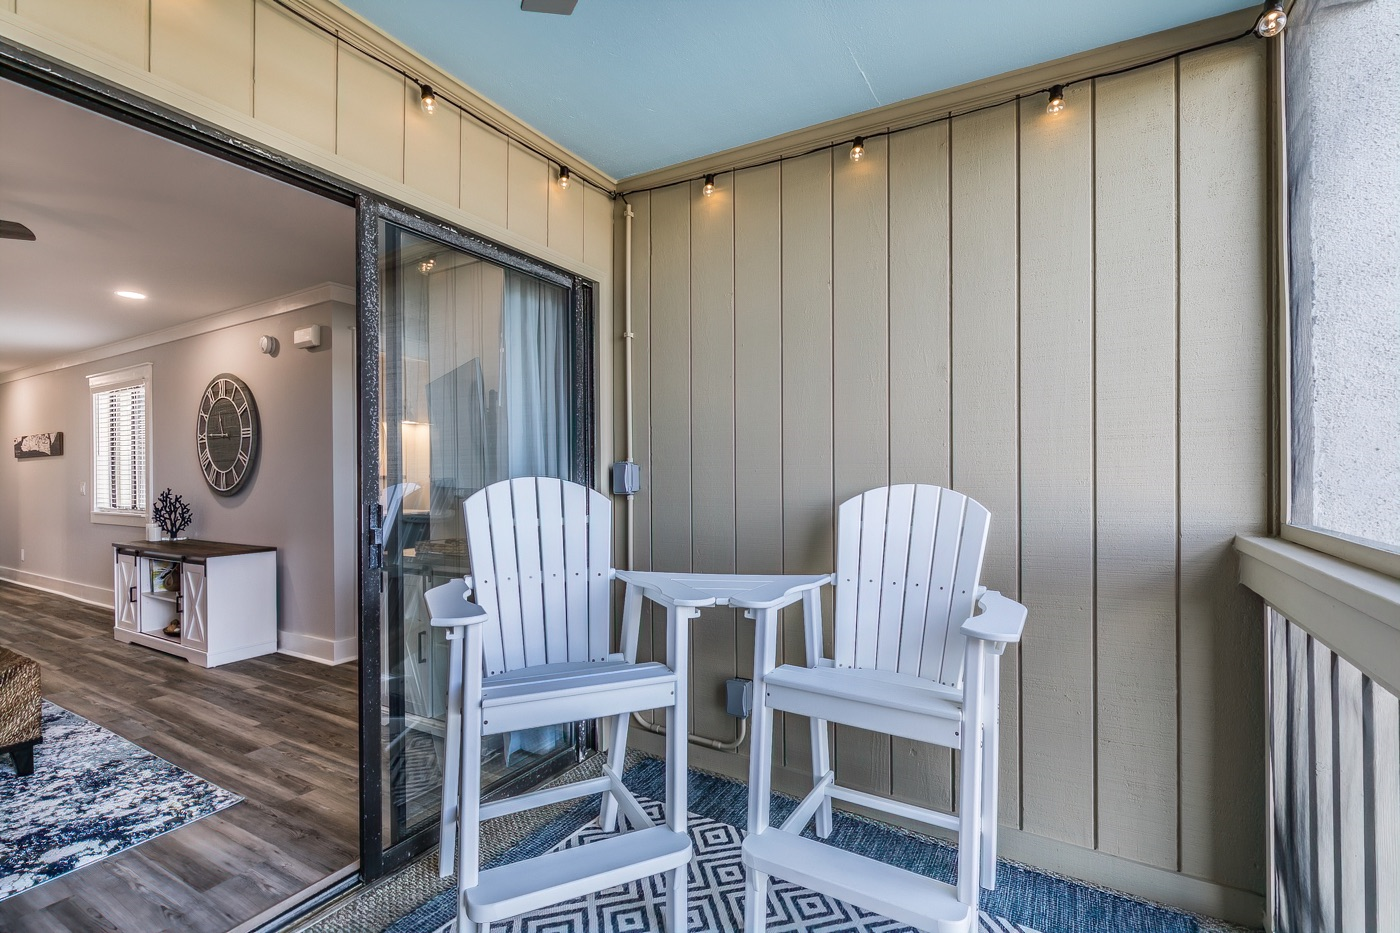 Tall Adirondack chairs allow for INCREDIBLE and unobstructed views of the marsh and canal.